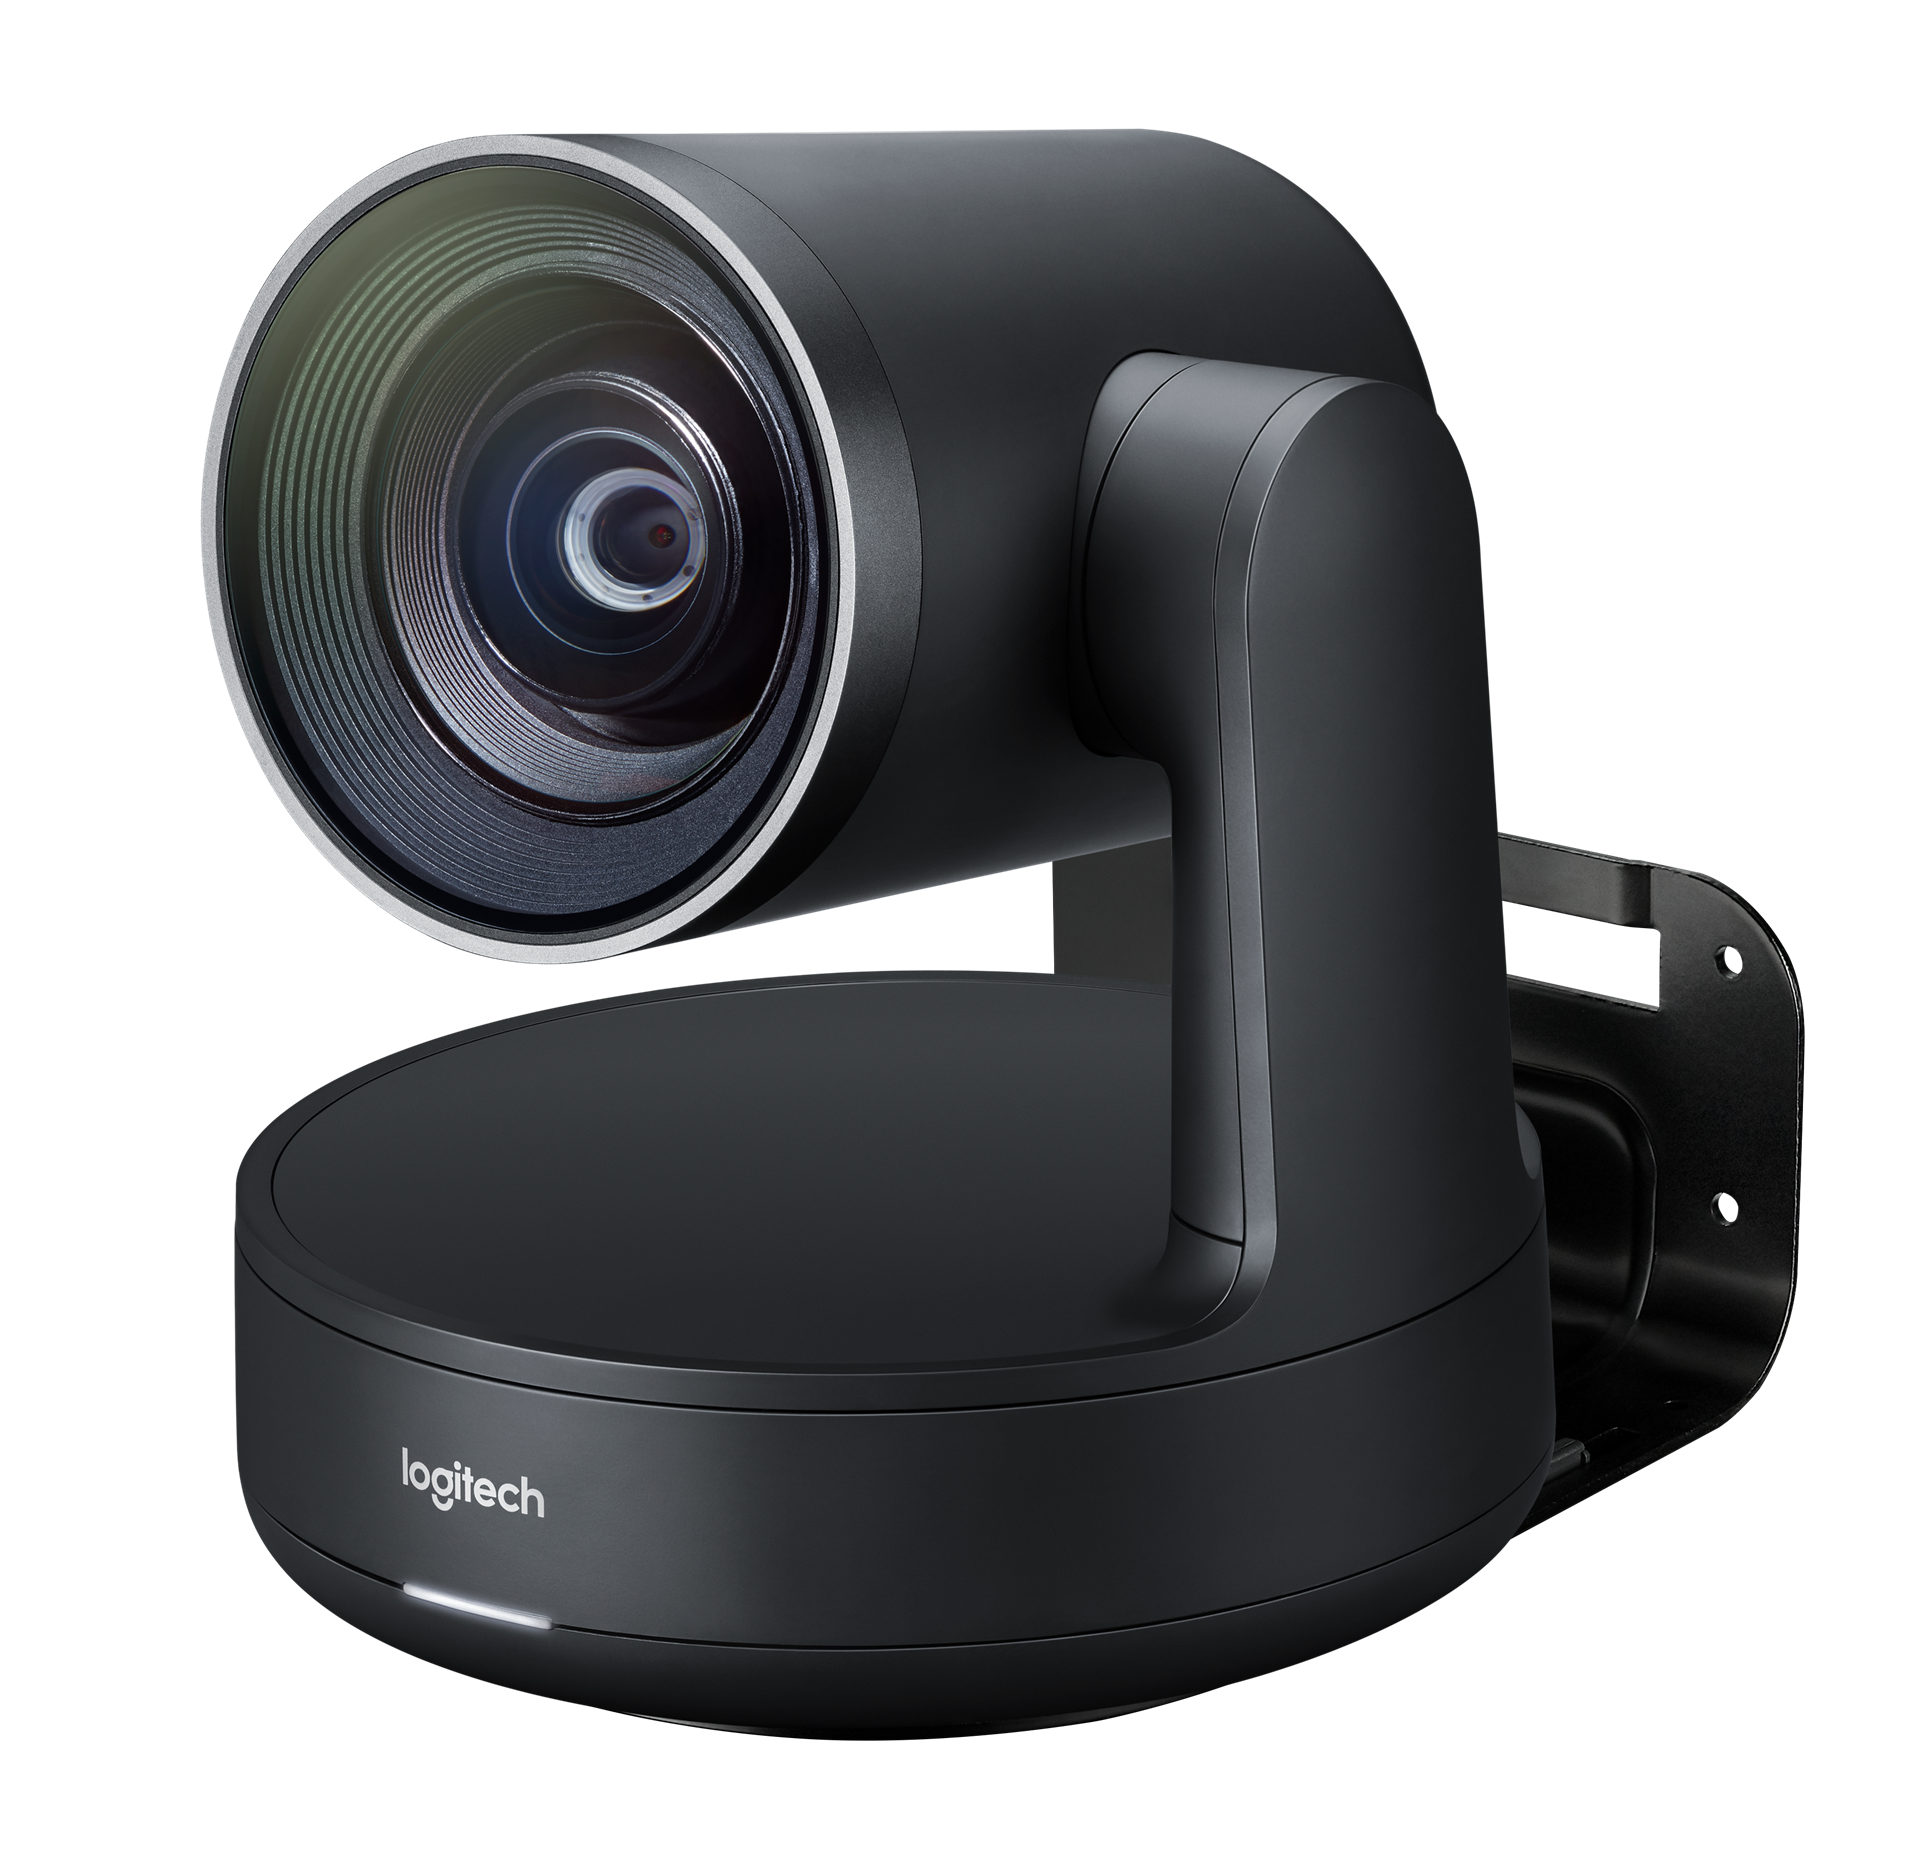 LO-421-5688 Premium PTZ camera with Ultra HD imaging system and automatic camera control.